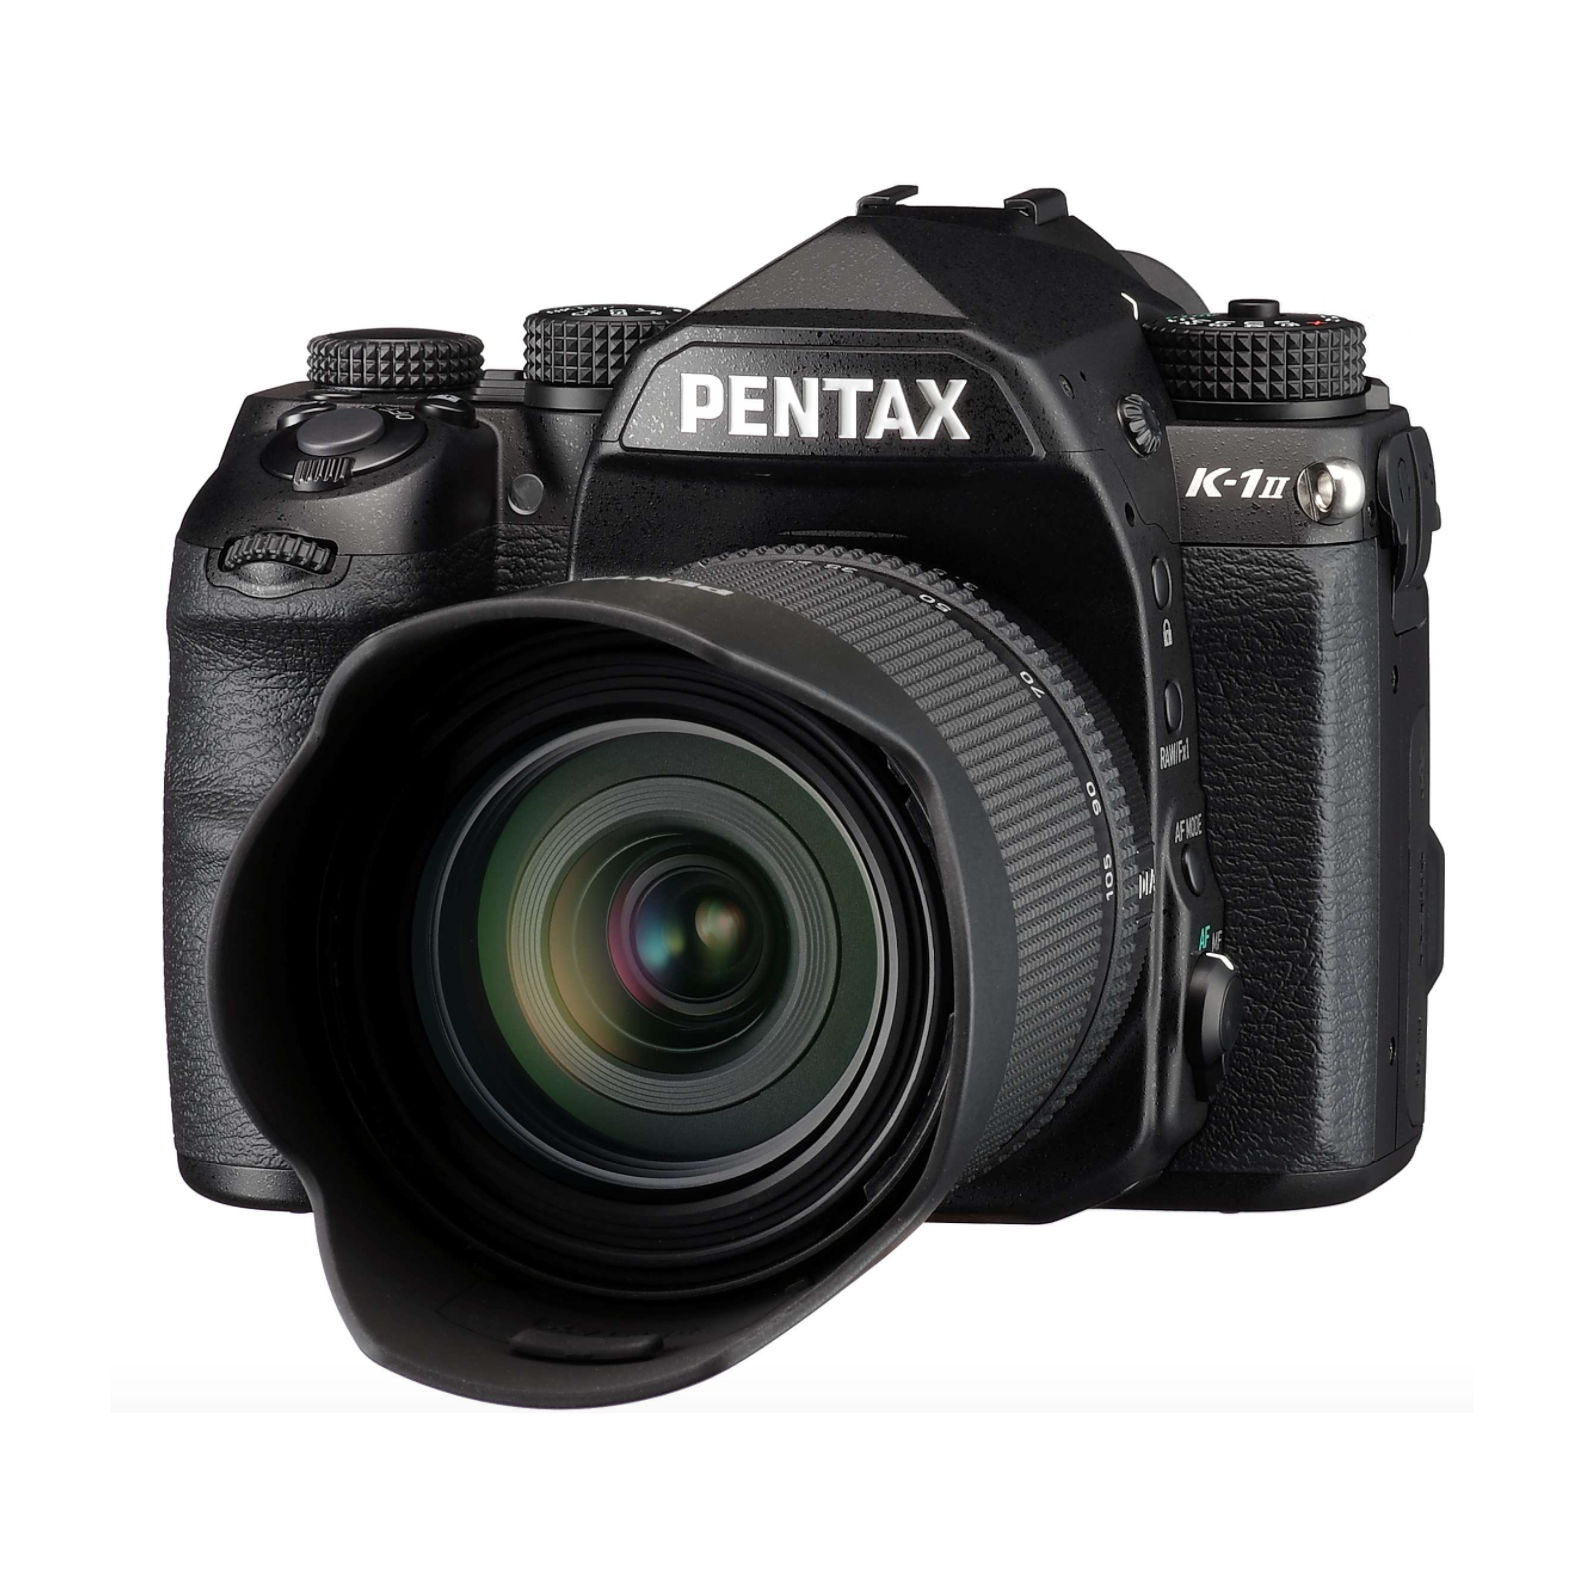 Pentax K-1 Mark II with 28-105mm WR Lens